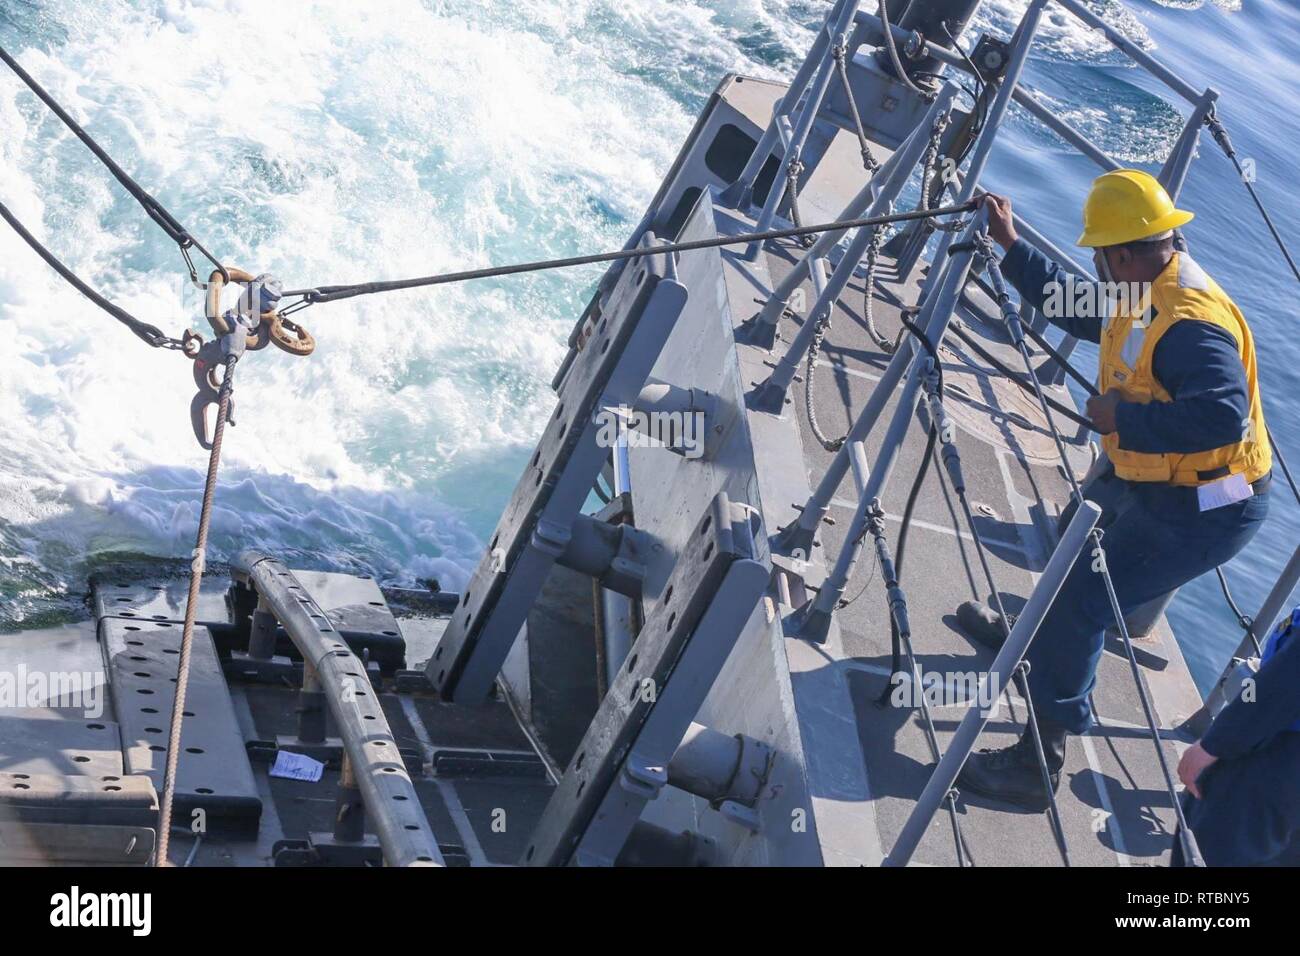 ARABIAN GULF (Feb. 9, 2019) Information Systems Technician 1st Class Clarance Duncan secures a line aboard the Cyclone-class coastal patrol ship USS Thunderbolt (PC 12). Thunderbolt is forward deployed to the U.S. 5th Fleet area of operations in support of naval operations to ensure maritime stability and security in the Central region, connecting the Mediterranean and the Pacific through the western Indian Ocean and three strategic choke points. Stock Photo